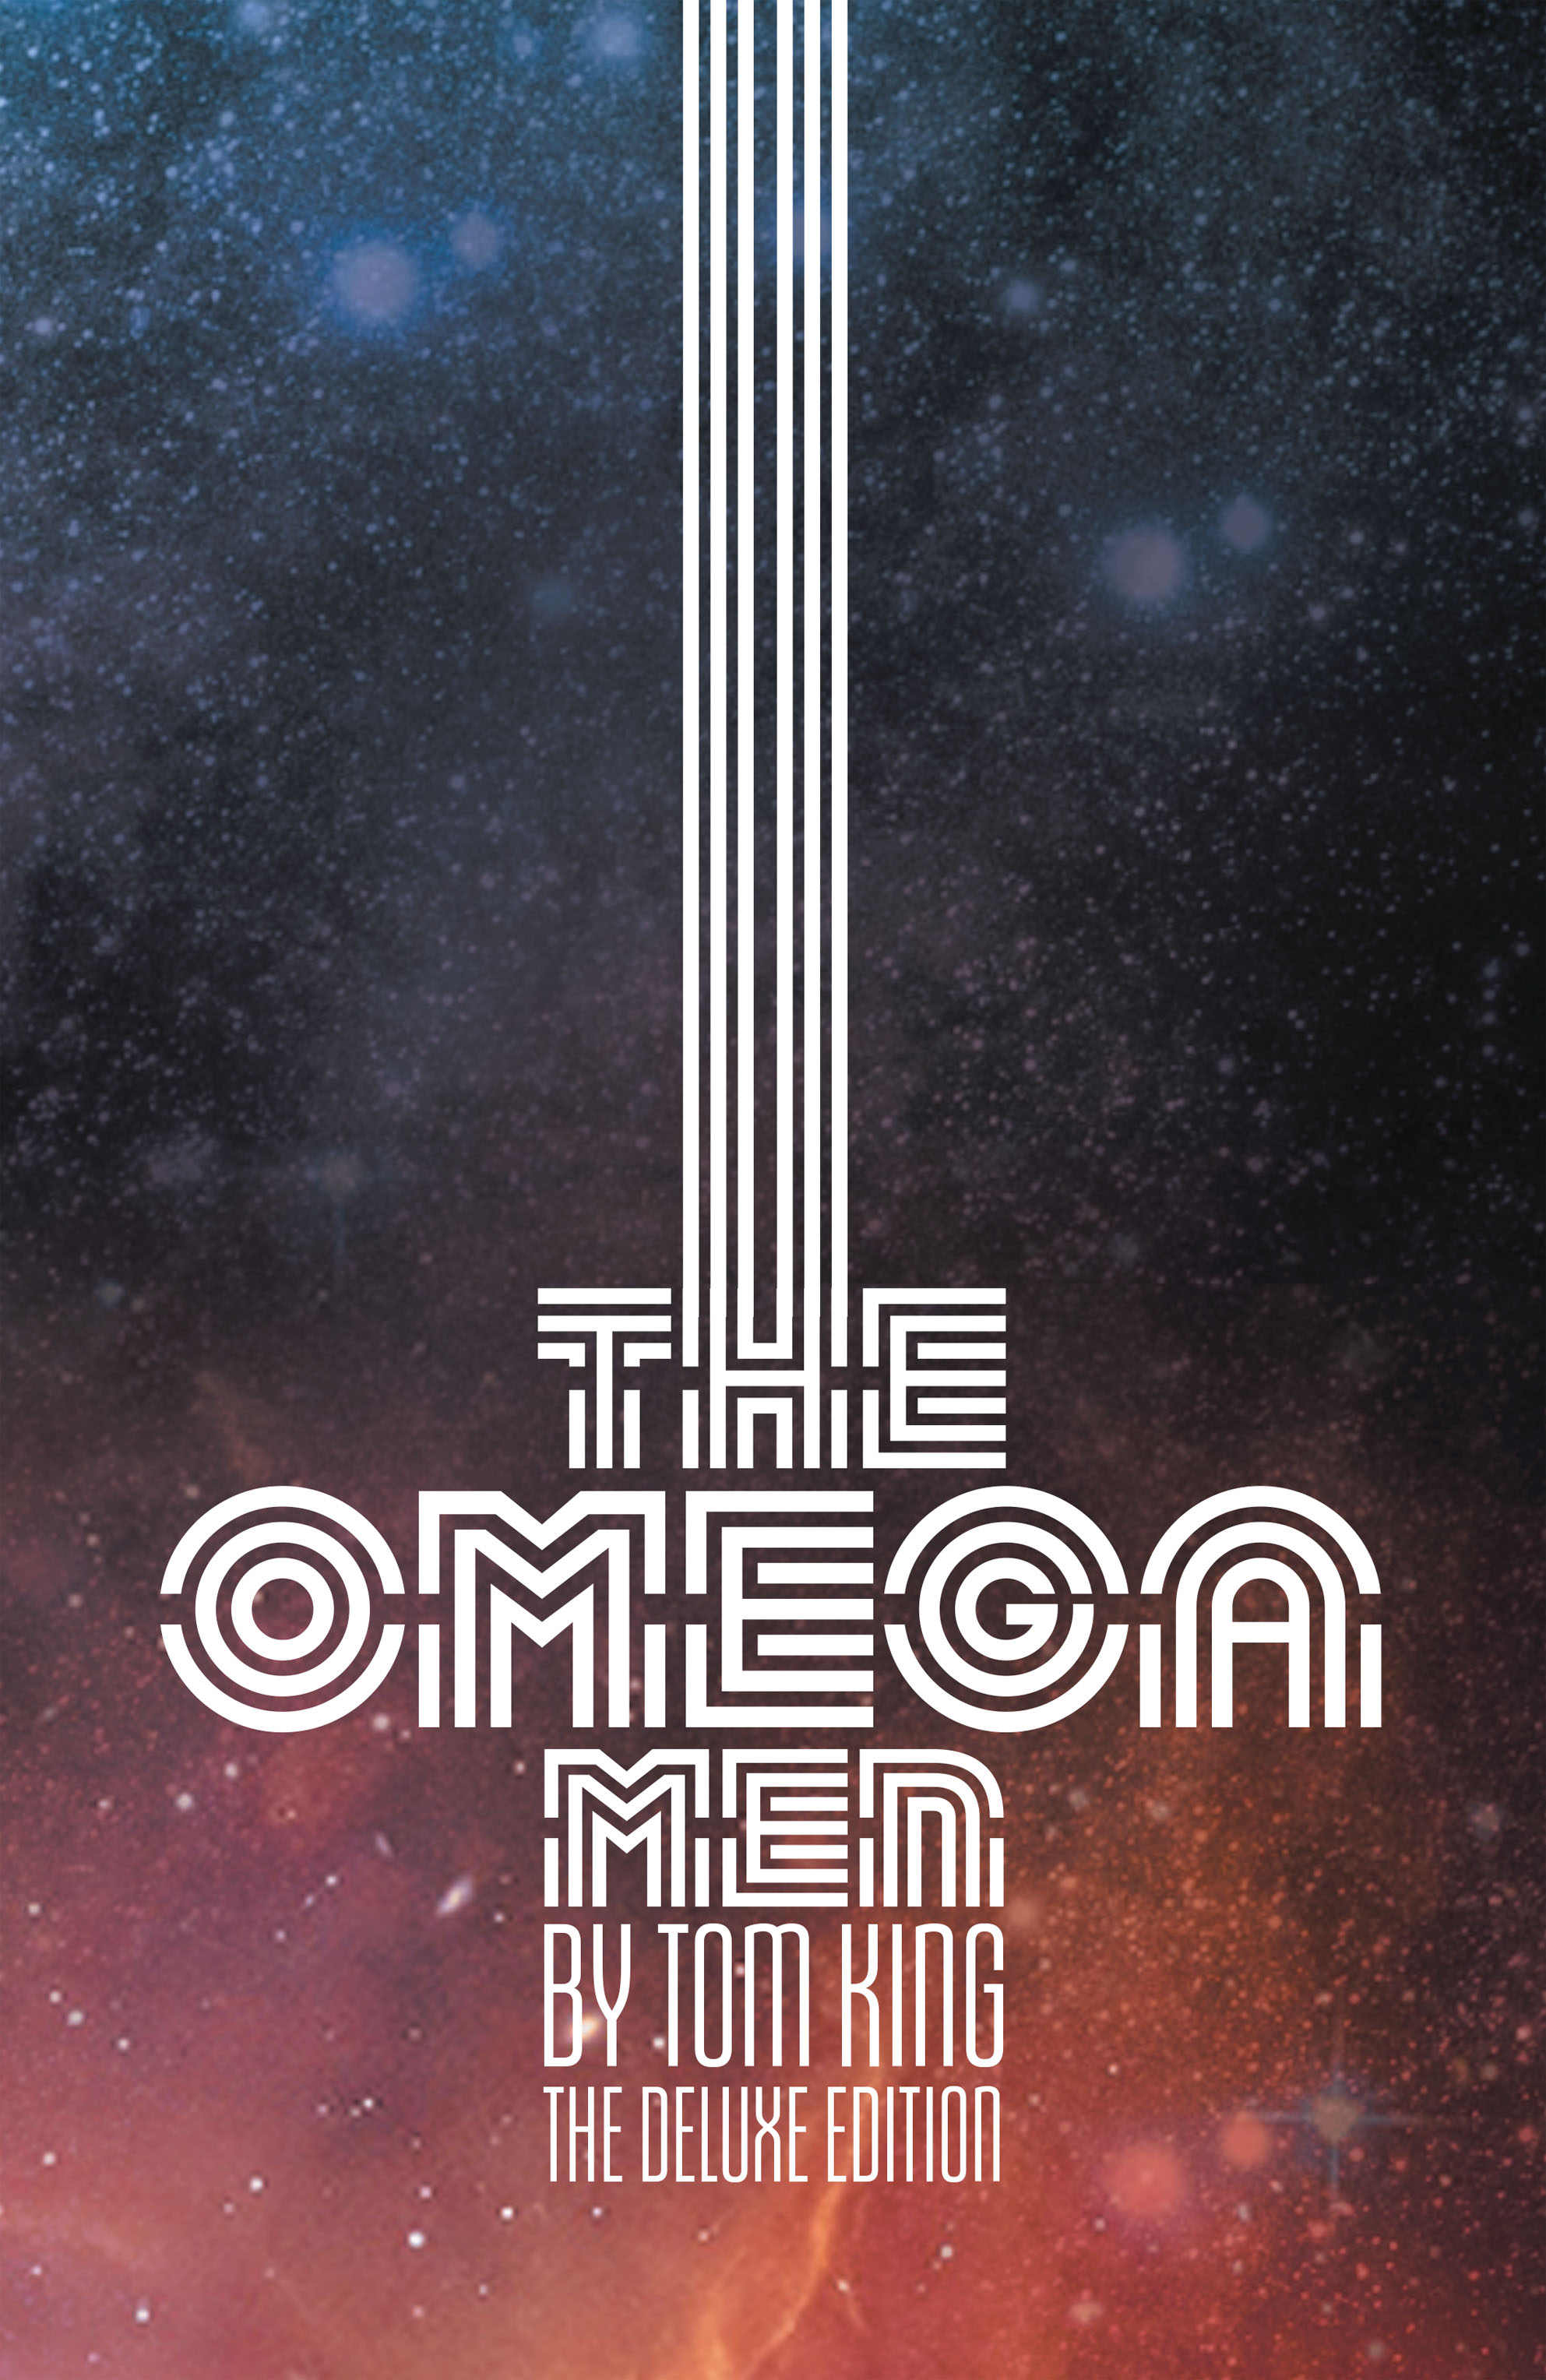 The Omega Men by Tom King: The Deluxe Edition (2020): Chapter 1 - Page 2